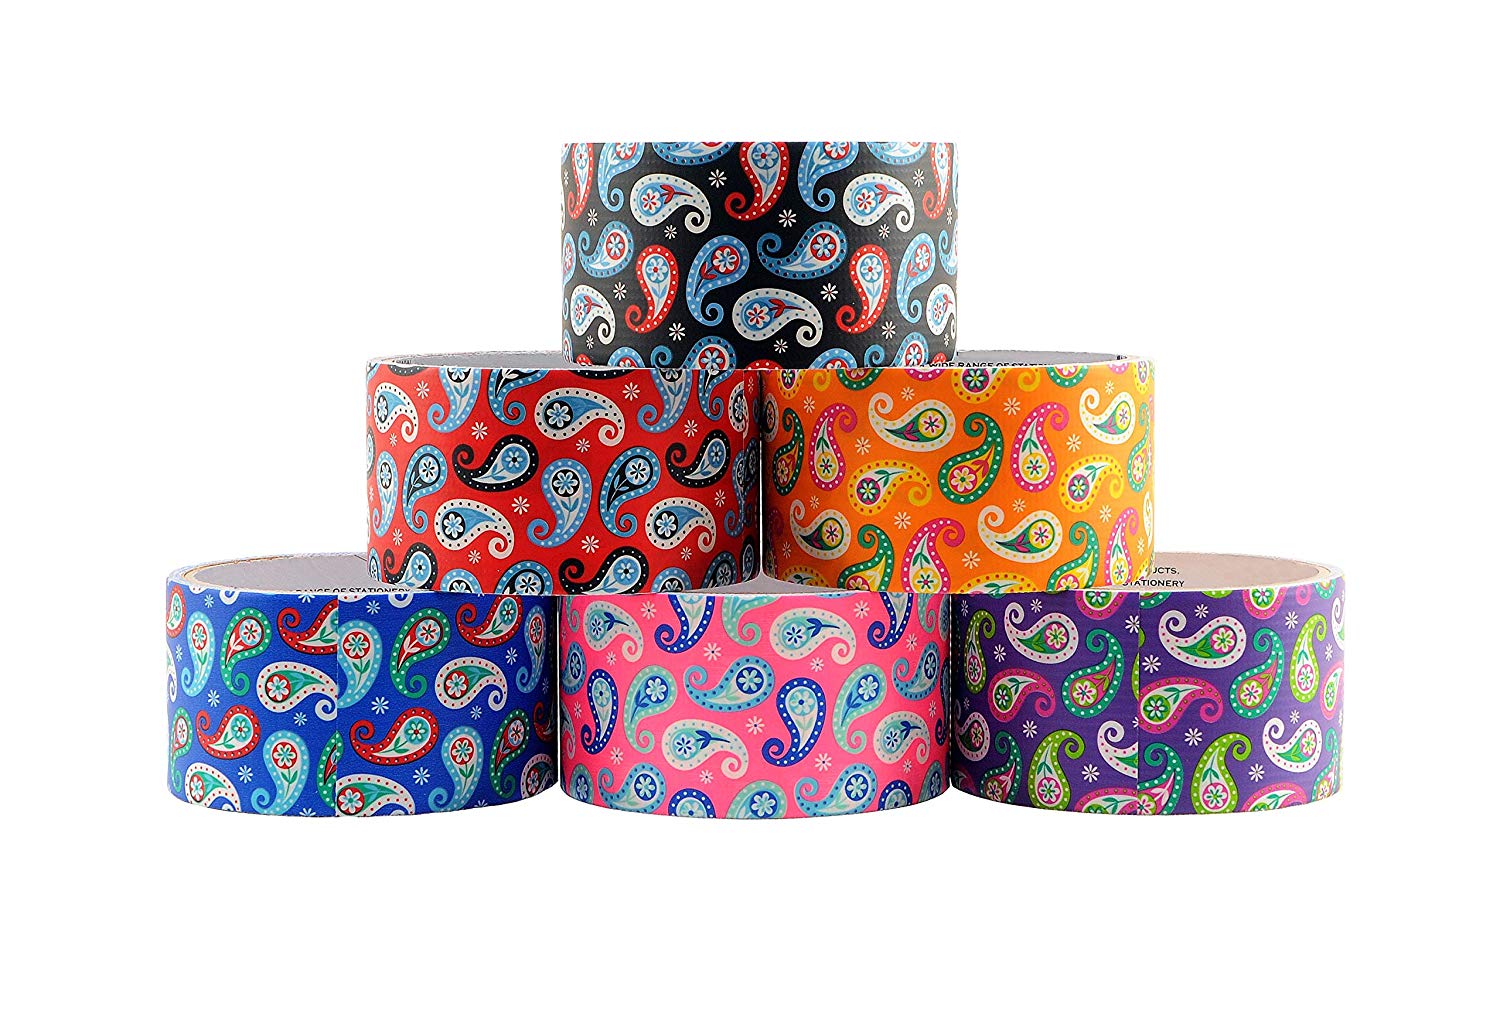 18 Bazic Duct Tapes(Polka-dot+Chevron+Camouflage) Northland Wholesale